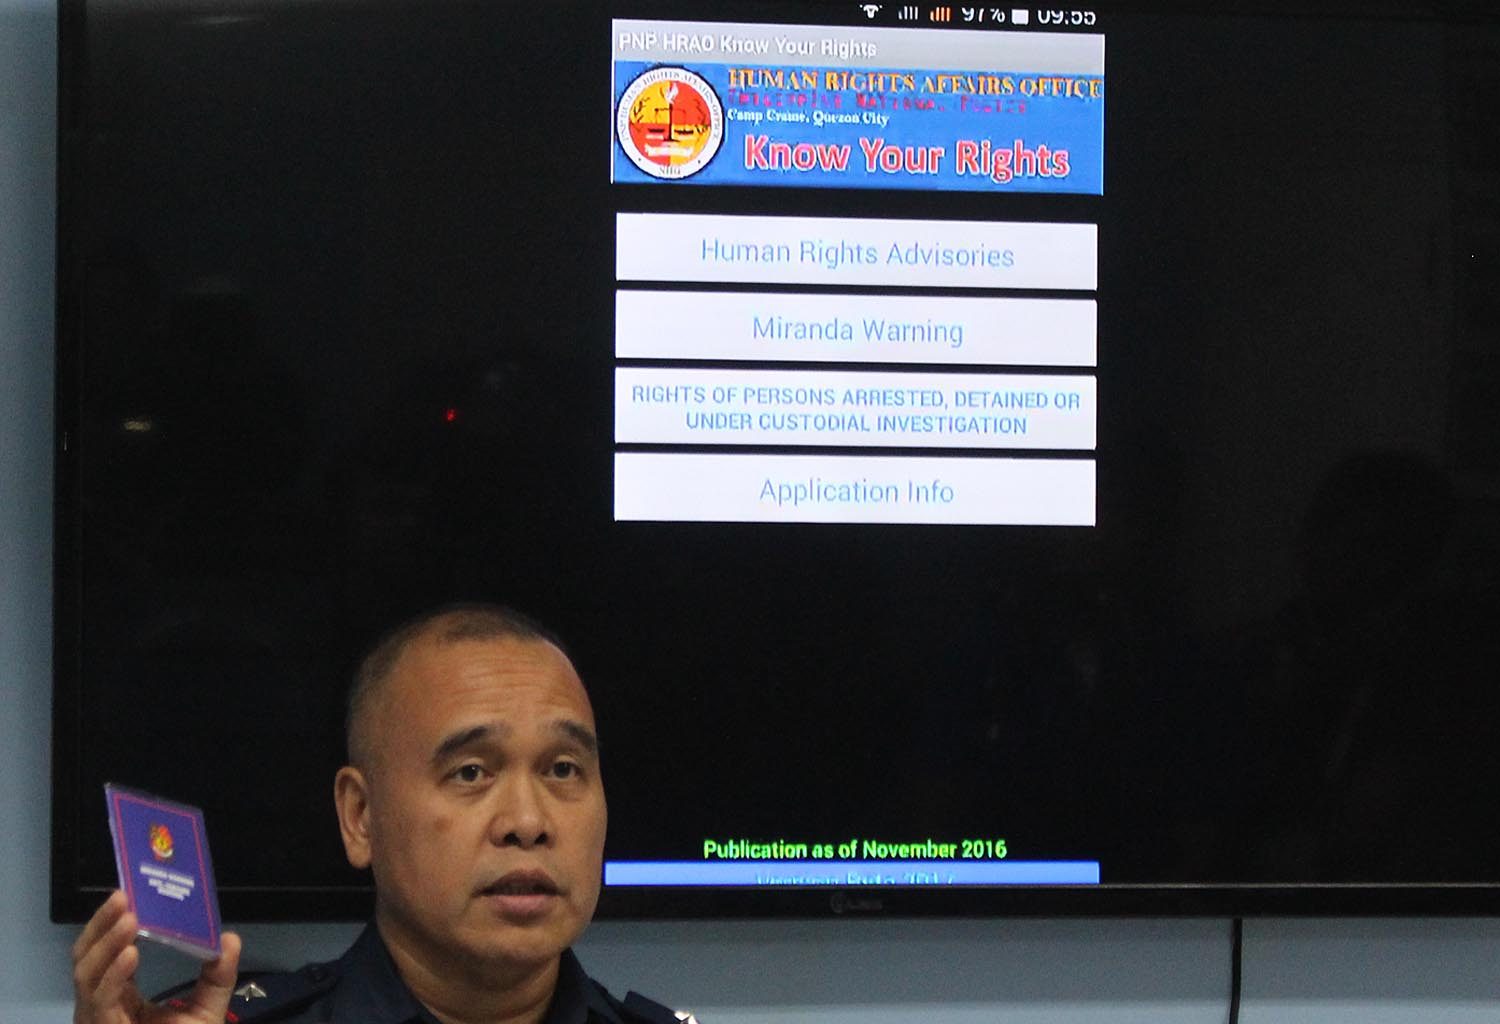 PNP’s ‘Know Your Rights’ app updated to remove permissions